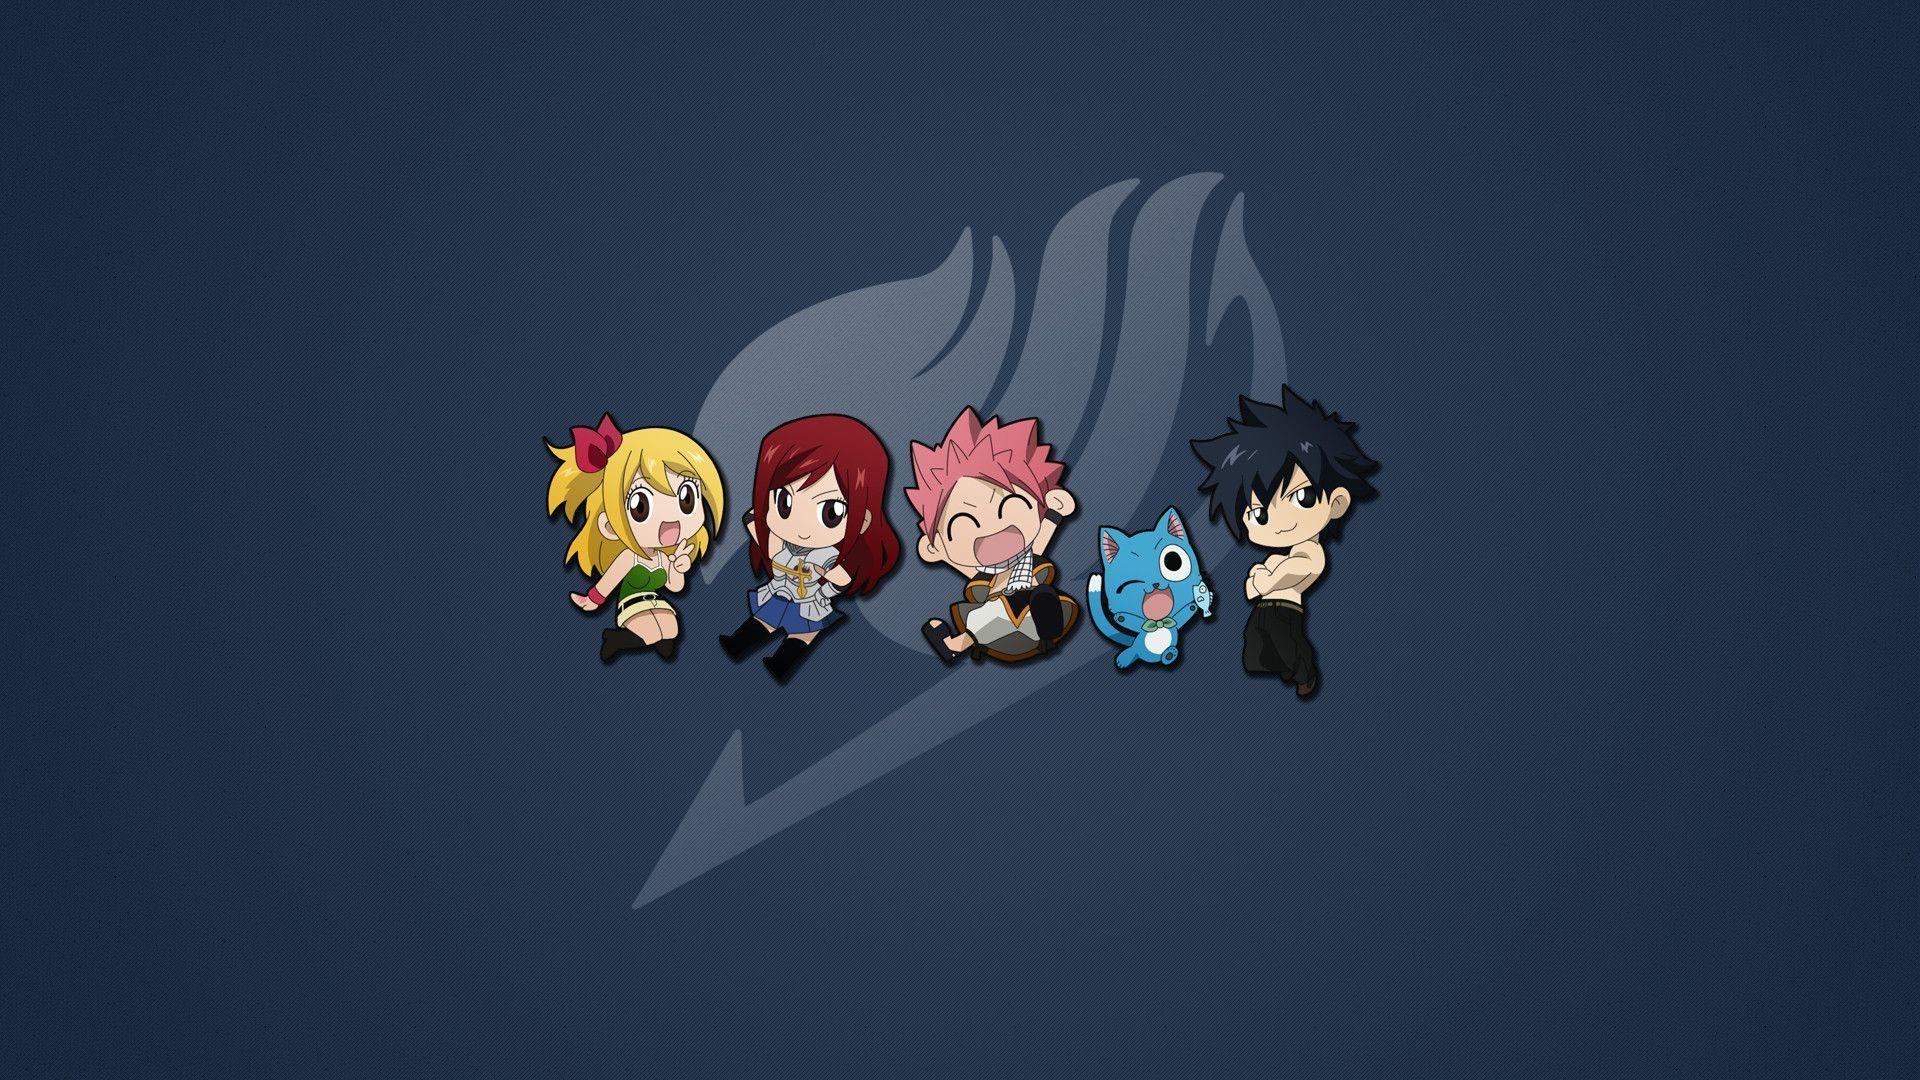 Fairy Tail Computer Wallpapers, Desk 4K Backgrounds Id